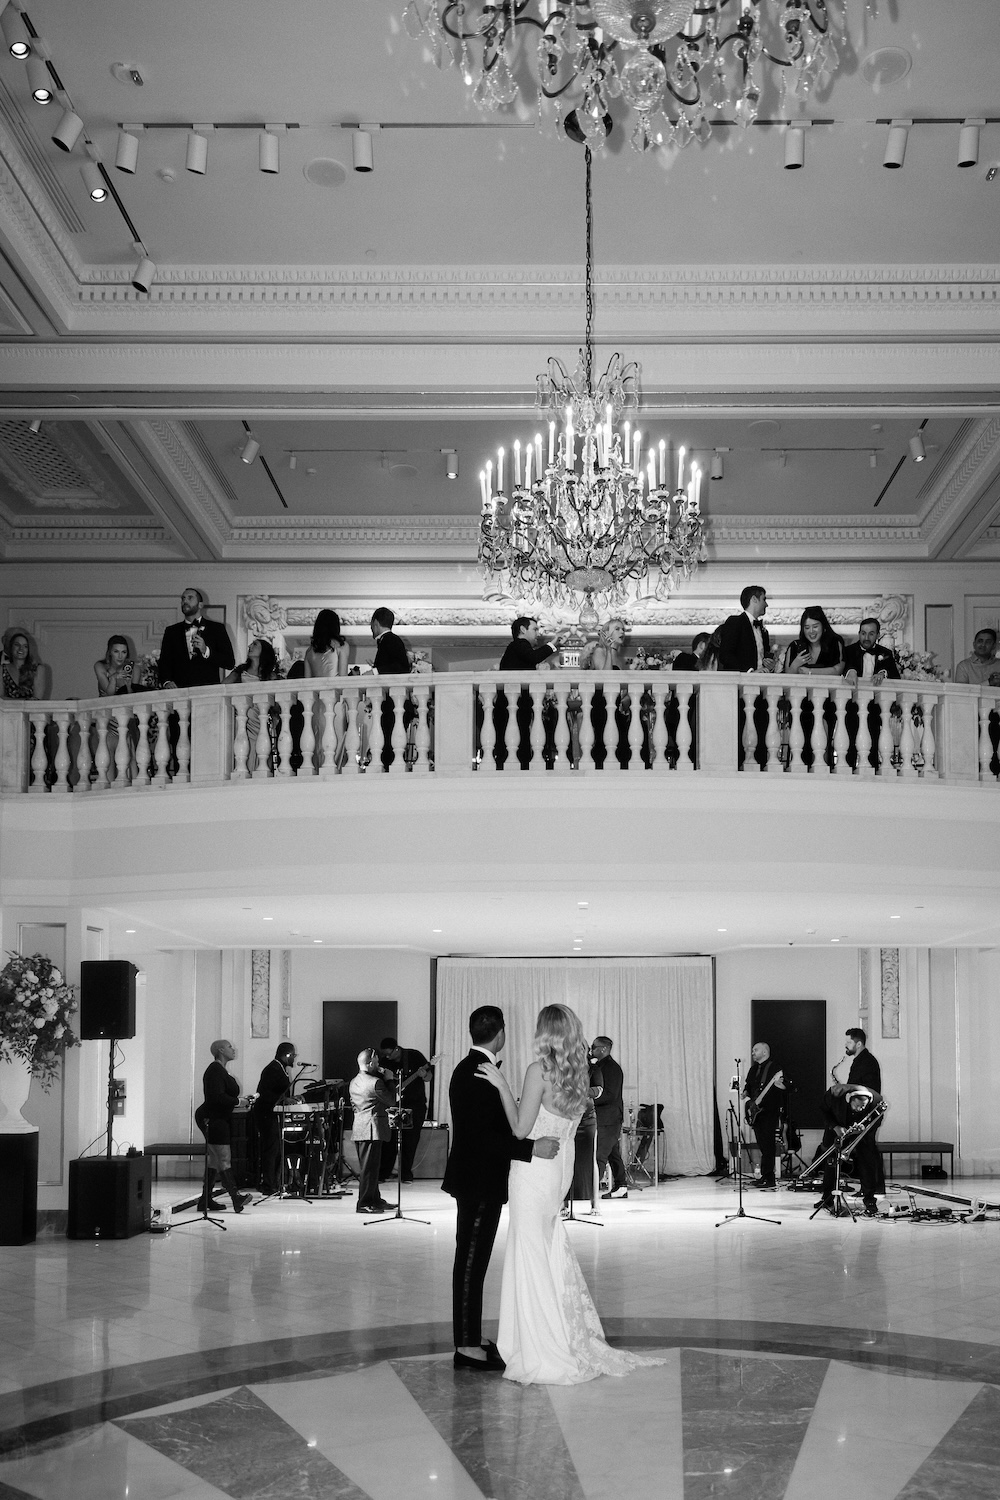 Bride and groom share first dance while guests watch on balcony. Modern Washington DC wedding at National Museum of Women in the Arts. Sarah Bradshaw Photography.